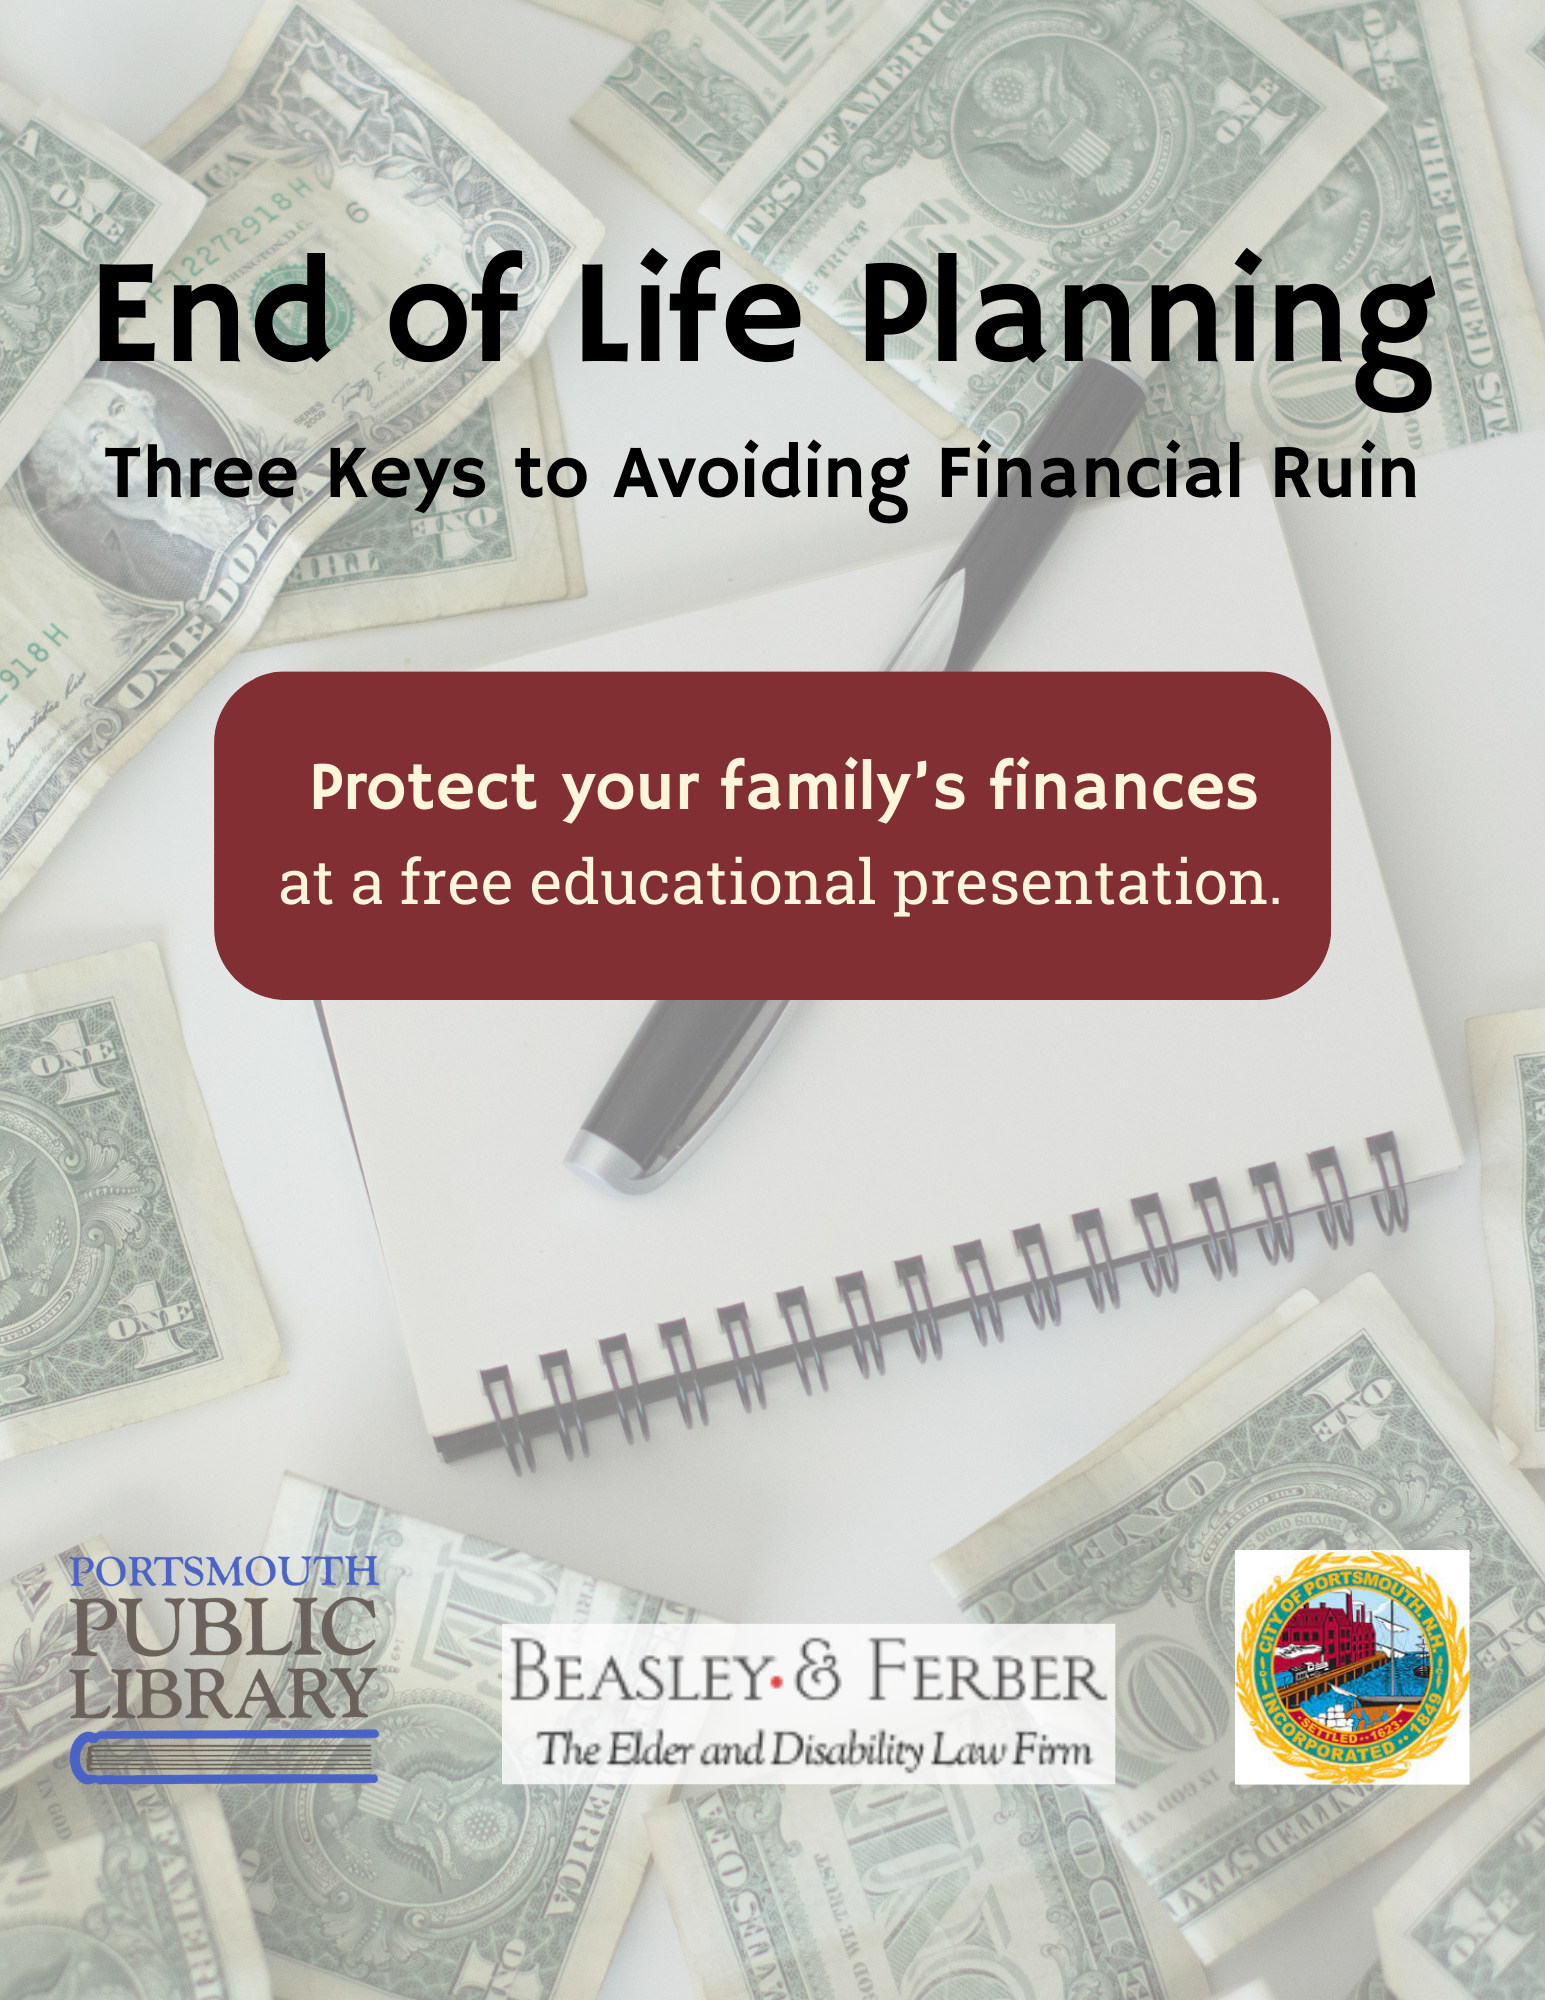 Money pen pad of paper End of Life Planning Workshop Avoiding probate, safeguarding finances Portsmouth Public Library Beasley Ferber Attorneys